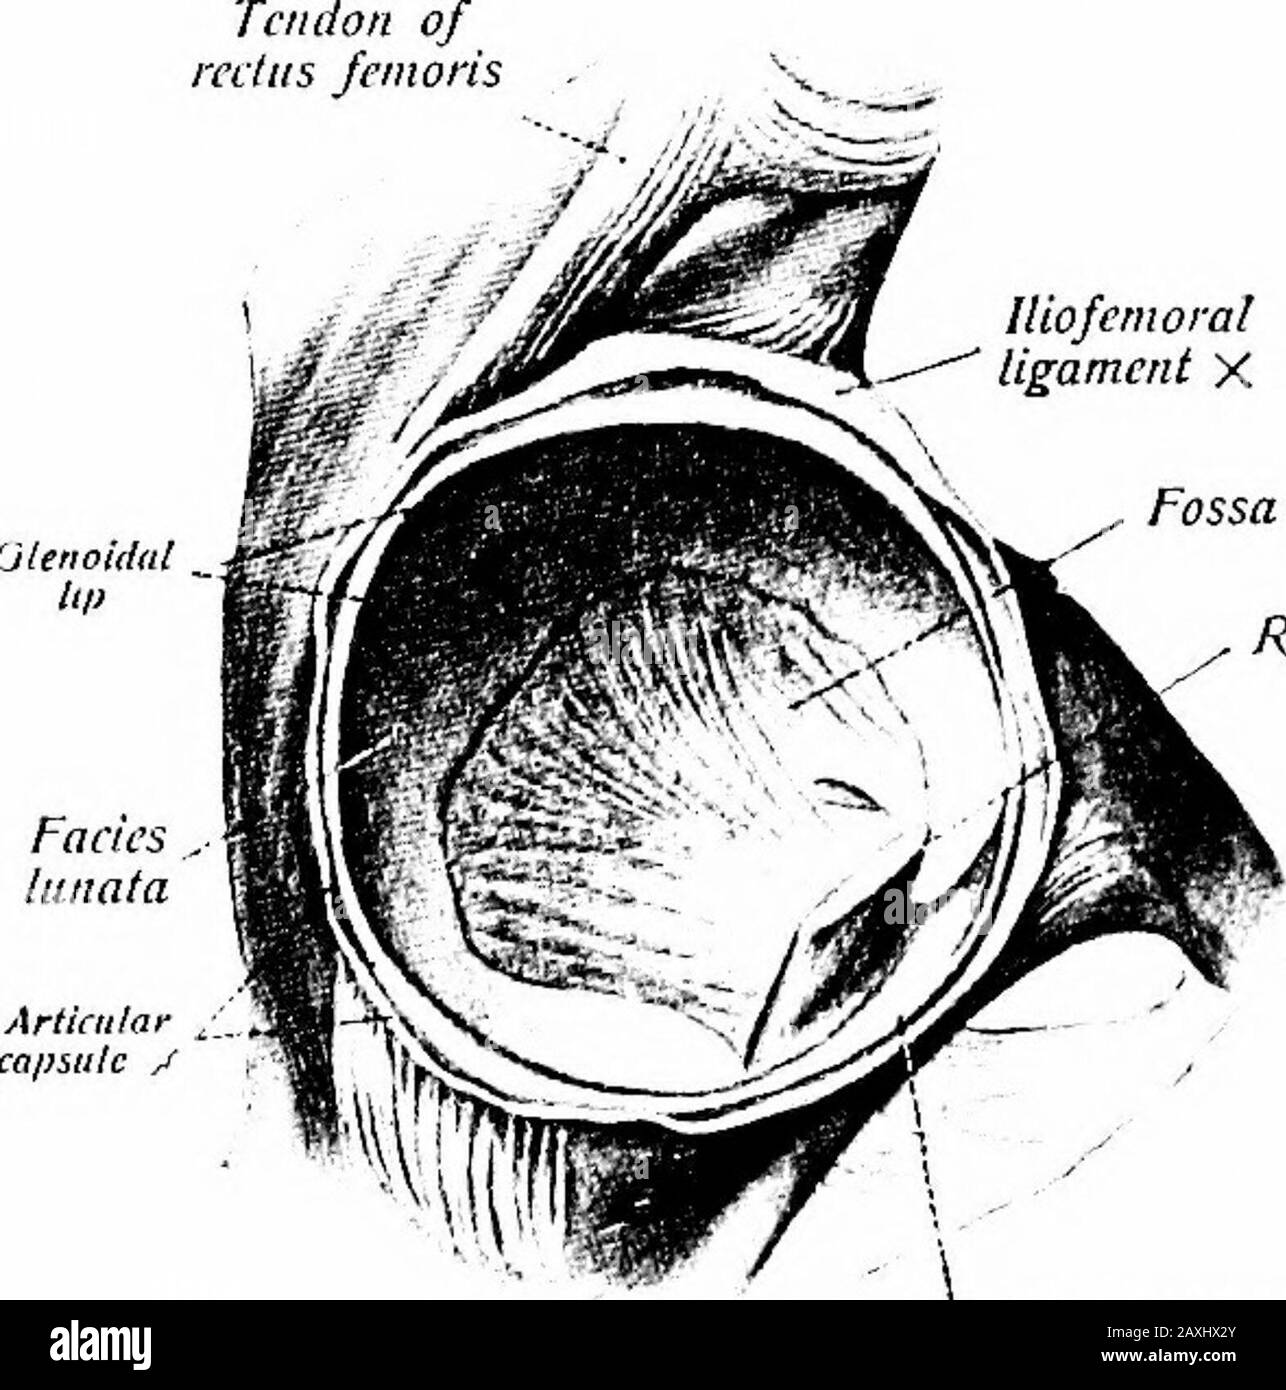 A manual of anatomy . GreatiT Irnrhnnlci Cilnlcol iiiberositv Fig. 104.—The right hip joint seen from behind. {Sobotia and McMurricn.) THE HIP JOINT 133 greater trochanter; ventrally, to the intertrochanteric line; dorsal]y,to the junction of the middle and lateral third of the neck andinferiorly to the region of the lesser trochanter. Most of the dorsalsurface of the neck is not intrascapular while all of the remainder is. The iliofemoral ligament {lig. iliofemorale) is J^-shaped and sup-ports the capsule ventraUy. It extends between the inferior marginof the superior spine of the ilium to th Stock Photo